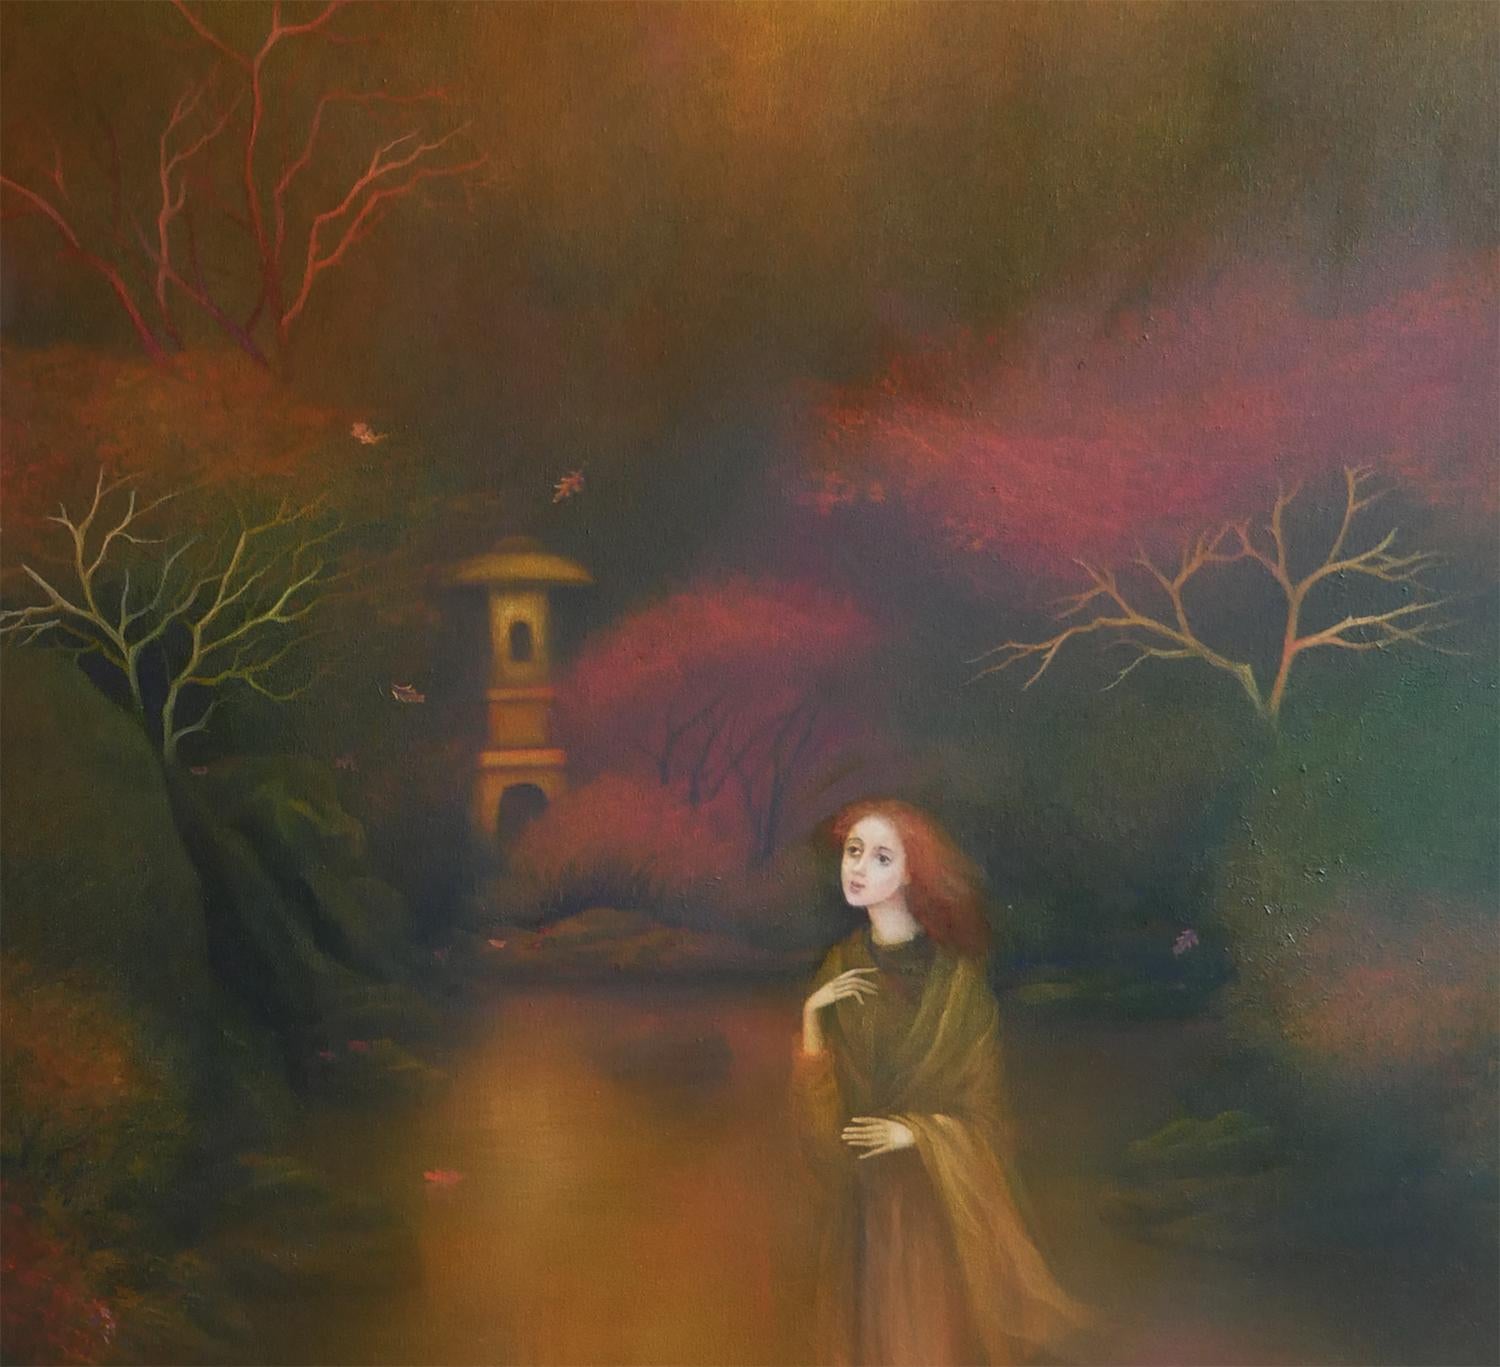 “Autumn Escape” Dark Abstract Figurative Woman in a Forest Surrealist Painting 1